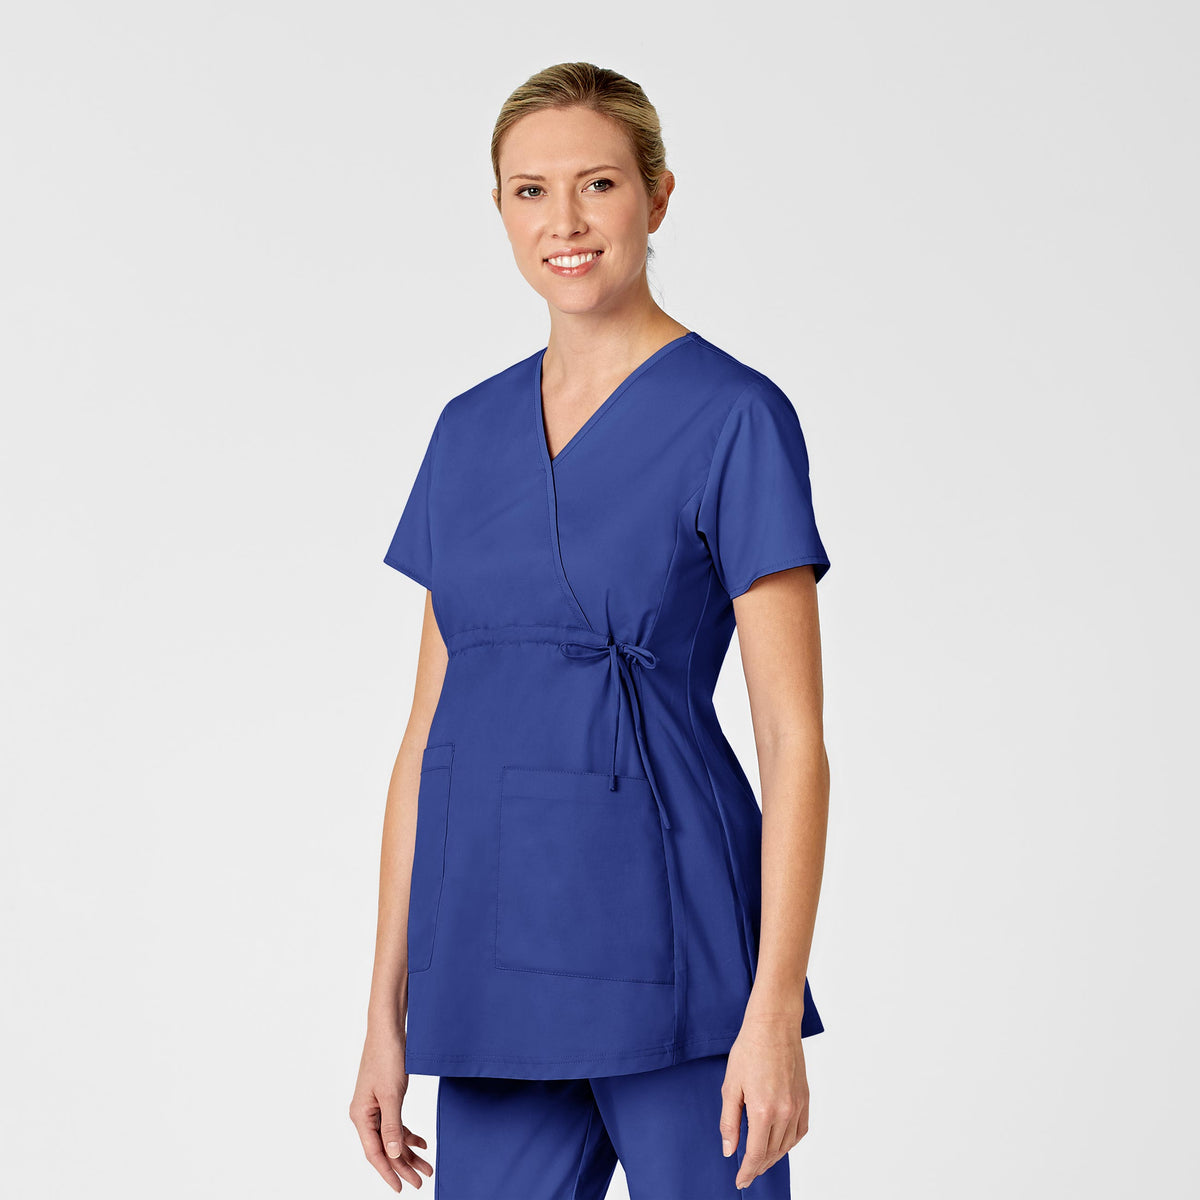 WonderWORK  Scrubs and Uniforms for everyone in Healthcare from Students  on up – Wink Scrubs